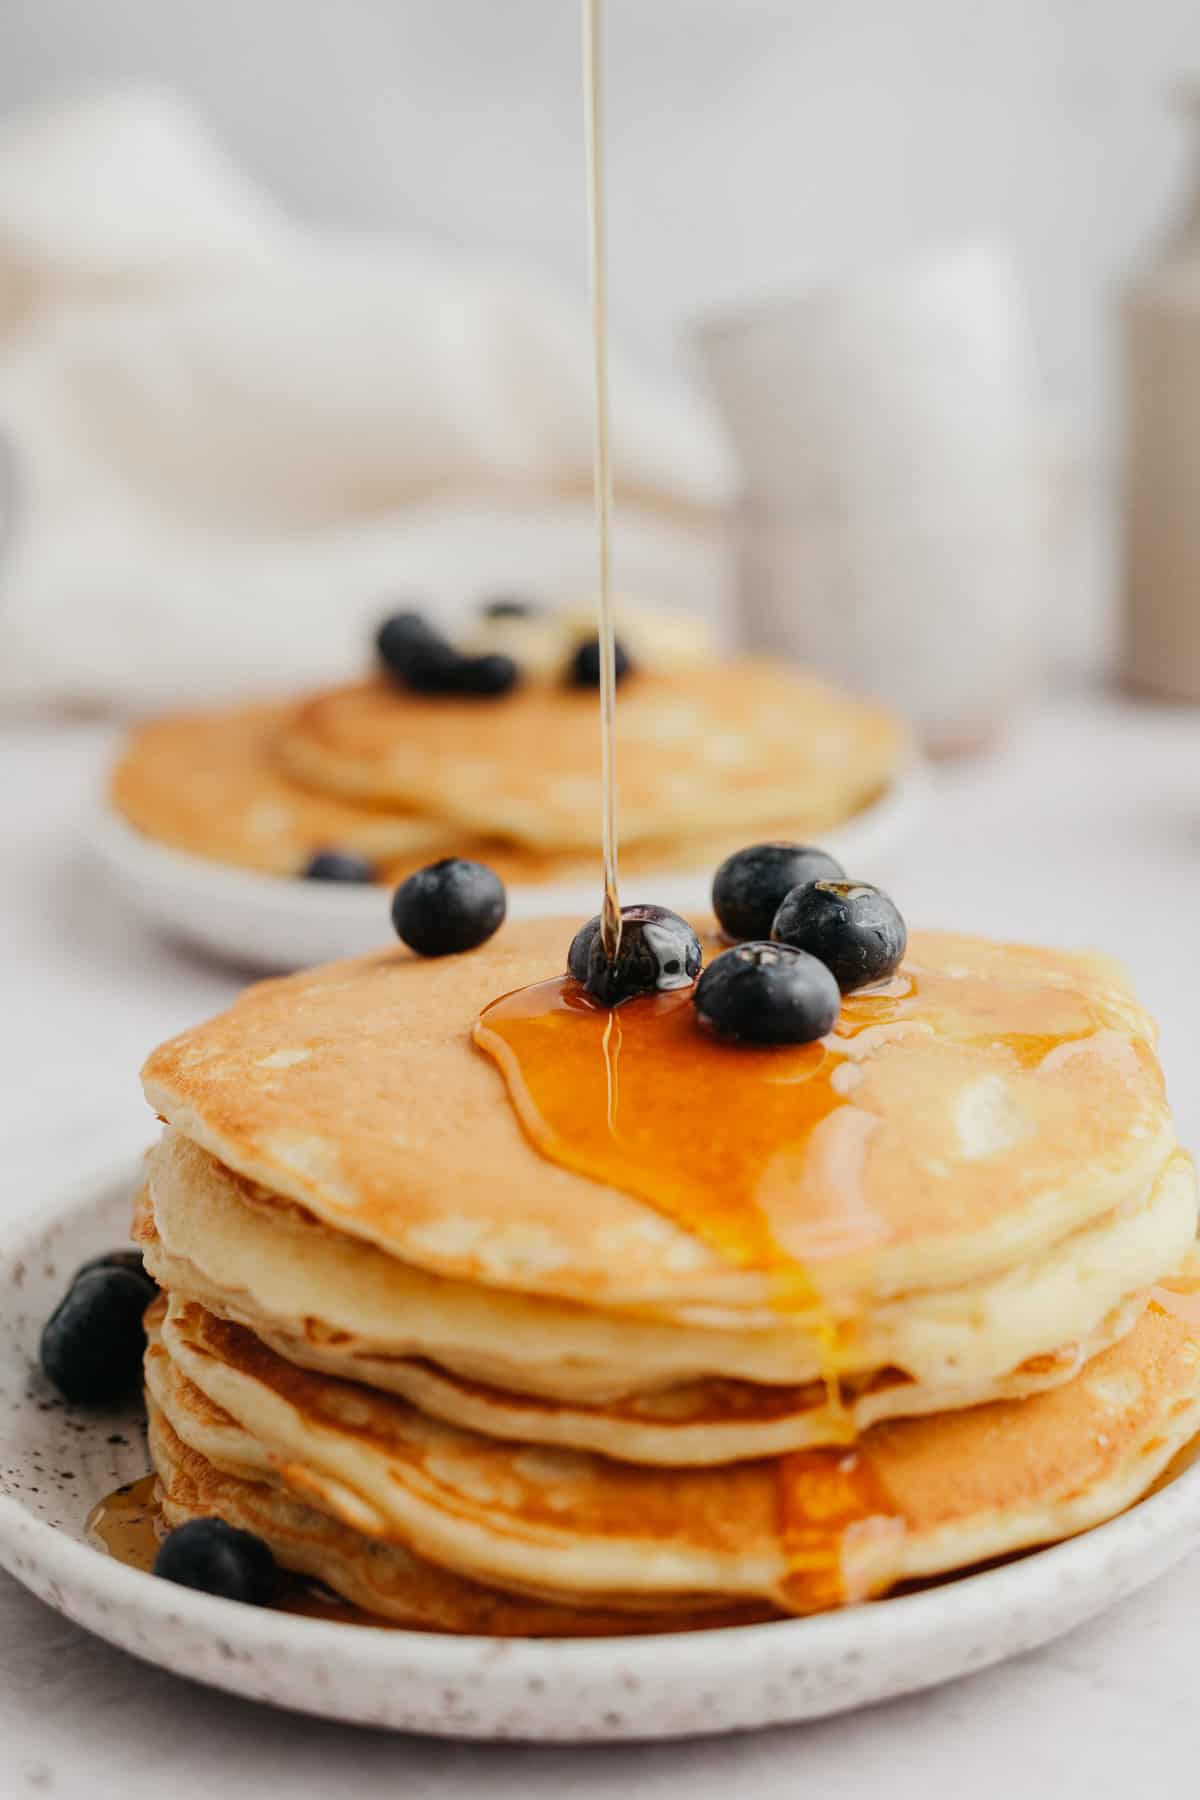 A stack of pancakes topped with blueberries, syrup is being poured on top.